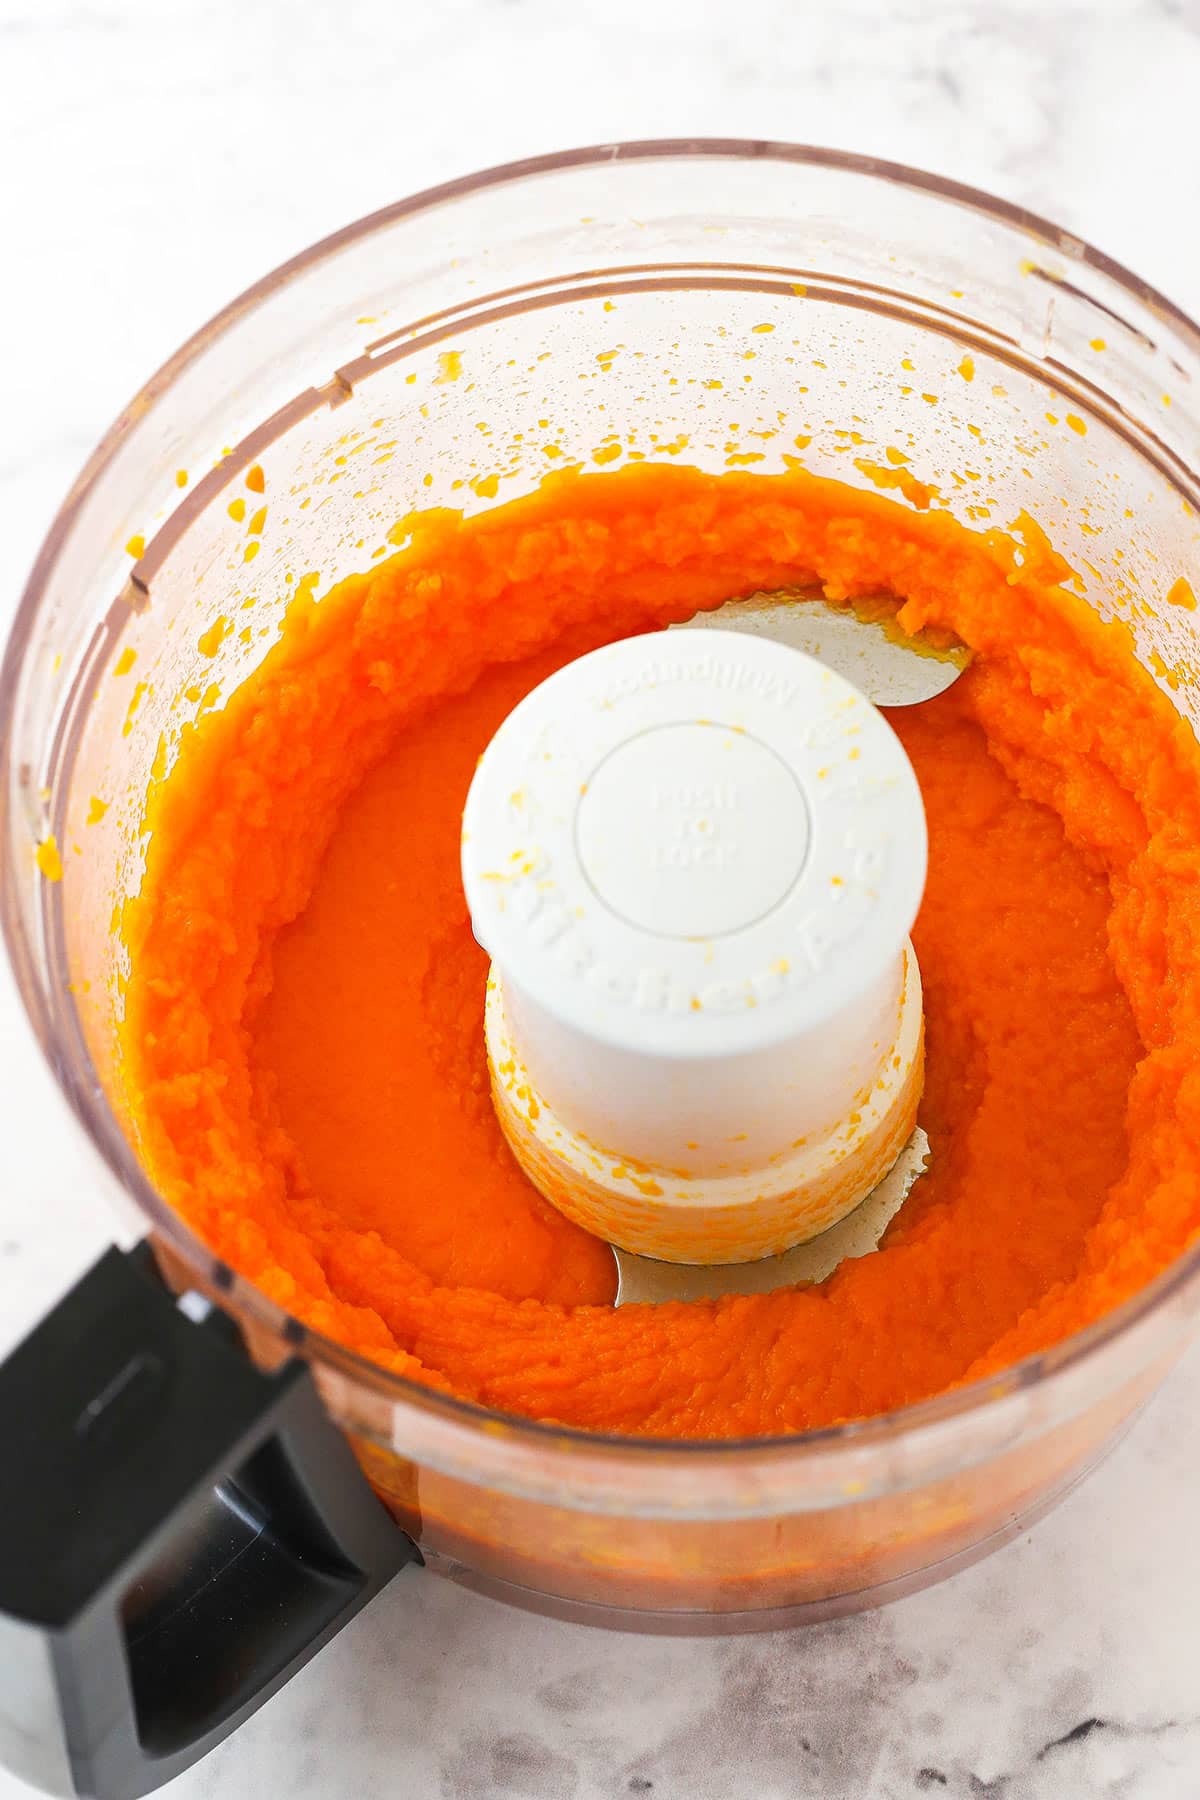 Pureed carrots inside of a food processor sitting on a kitchen countertop